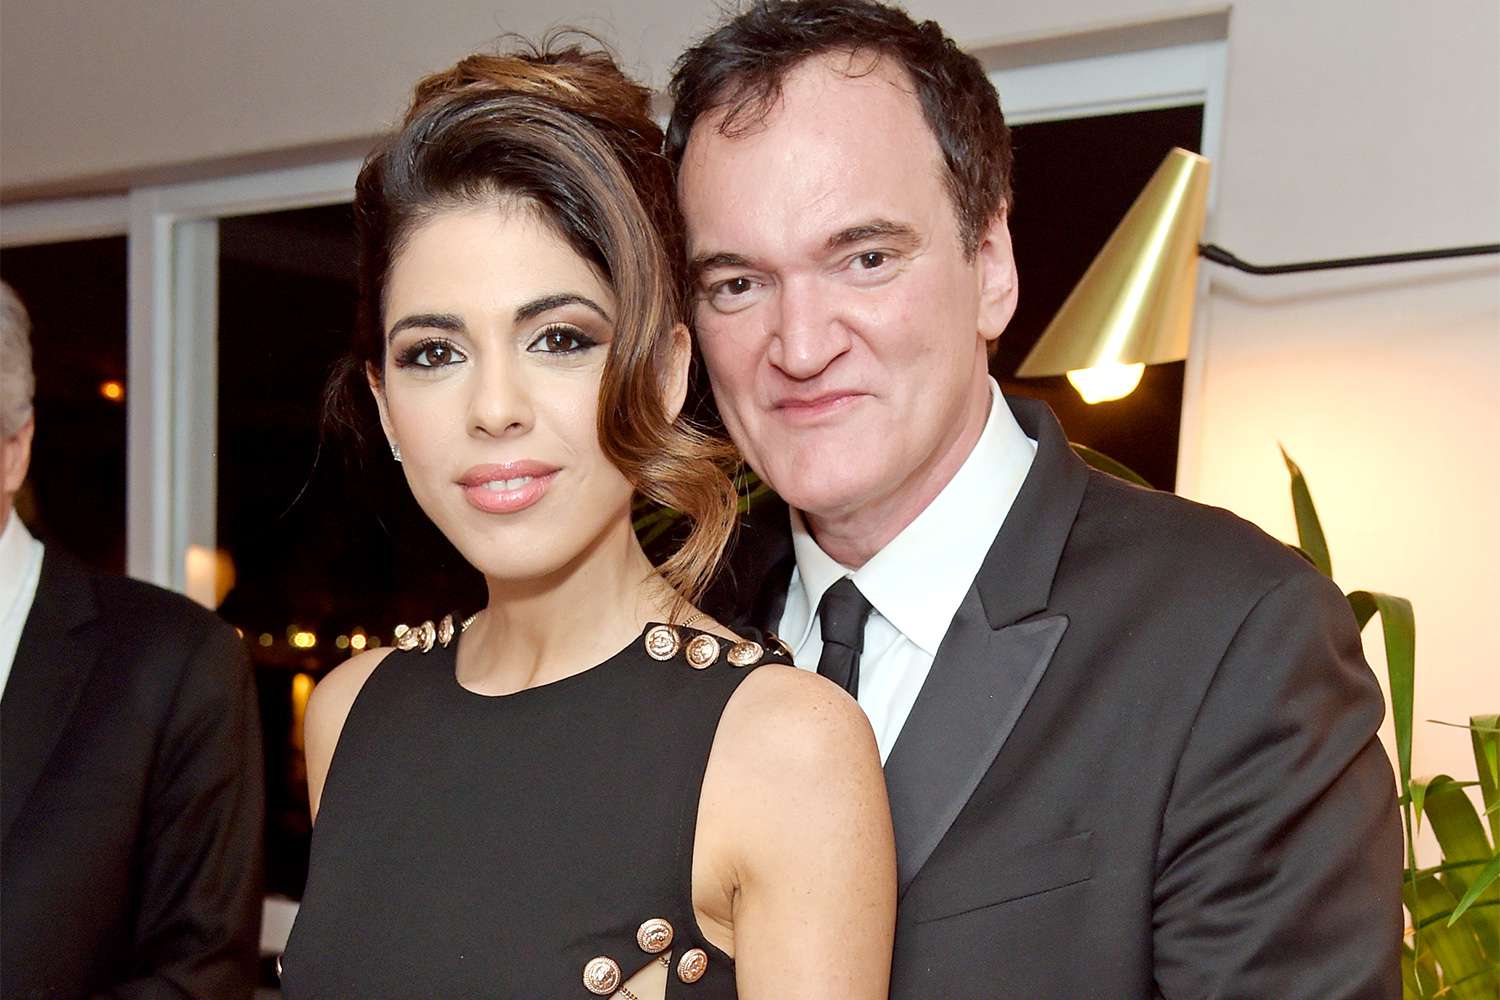 CANNES, FRANCE - MAY 21: Daniella Tarantino (L) and Quentin Tarantino attend the Once Upon A Time In Hollywood After Party at JW Marriott on May 21, 2019 in Cannes, France. (Photo by Antony Jones/Getty Images for Sony Pictures)